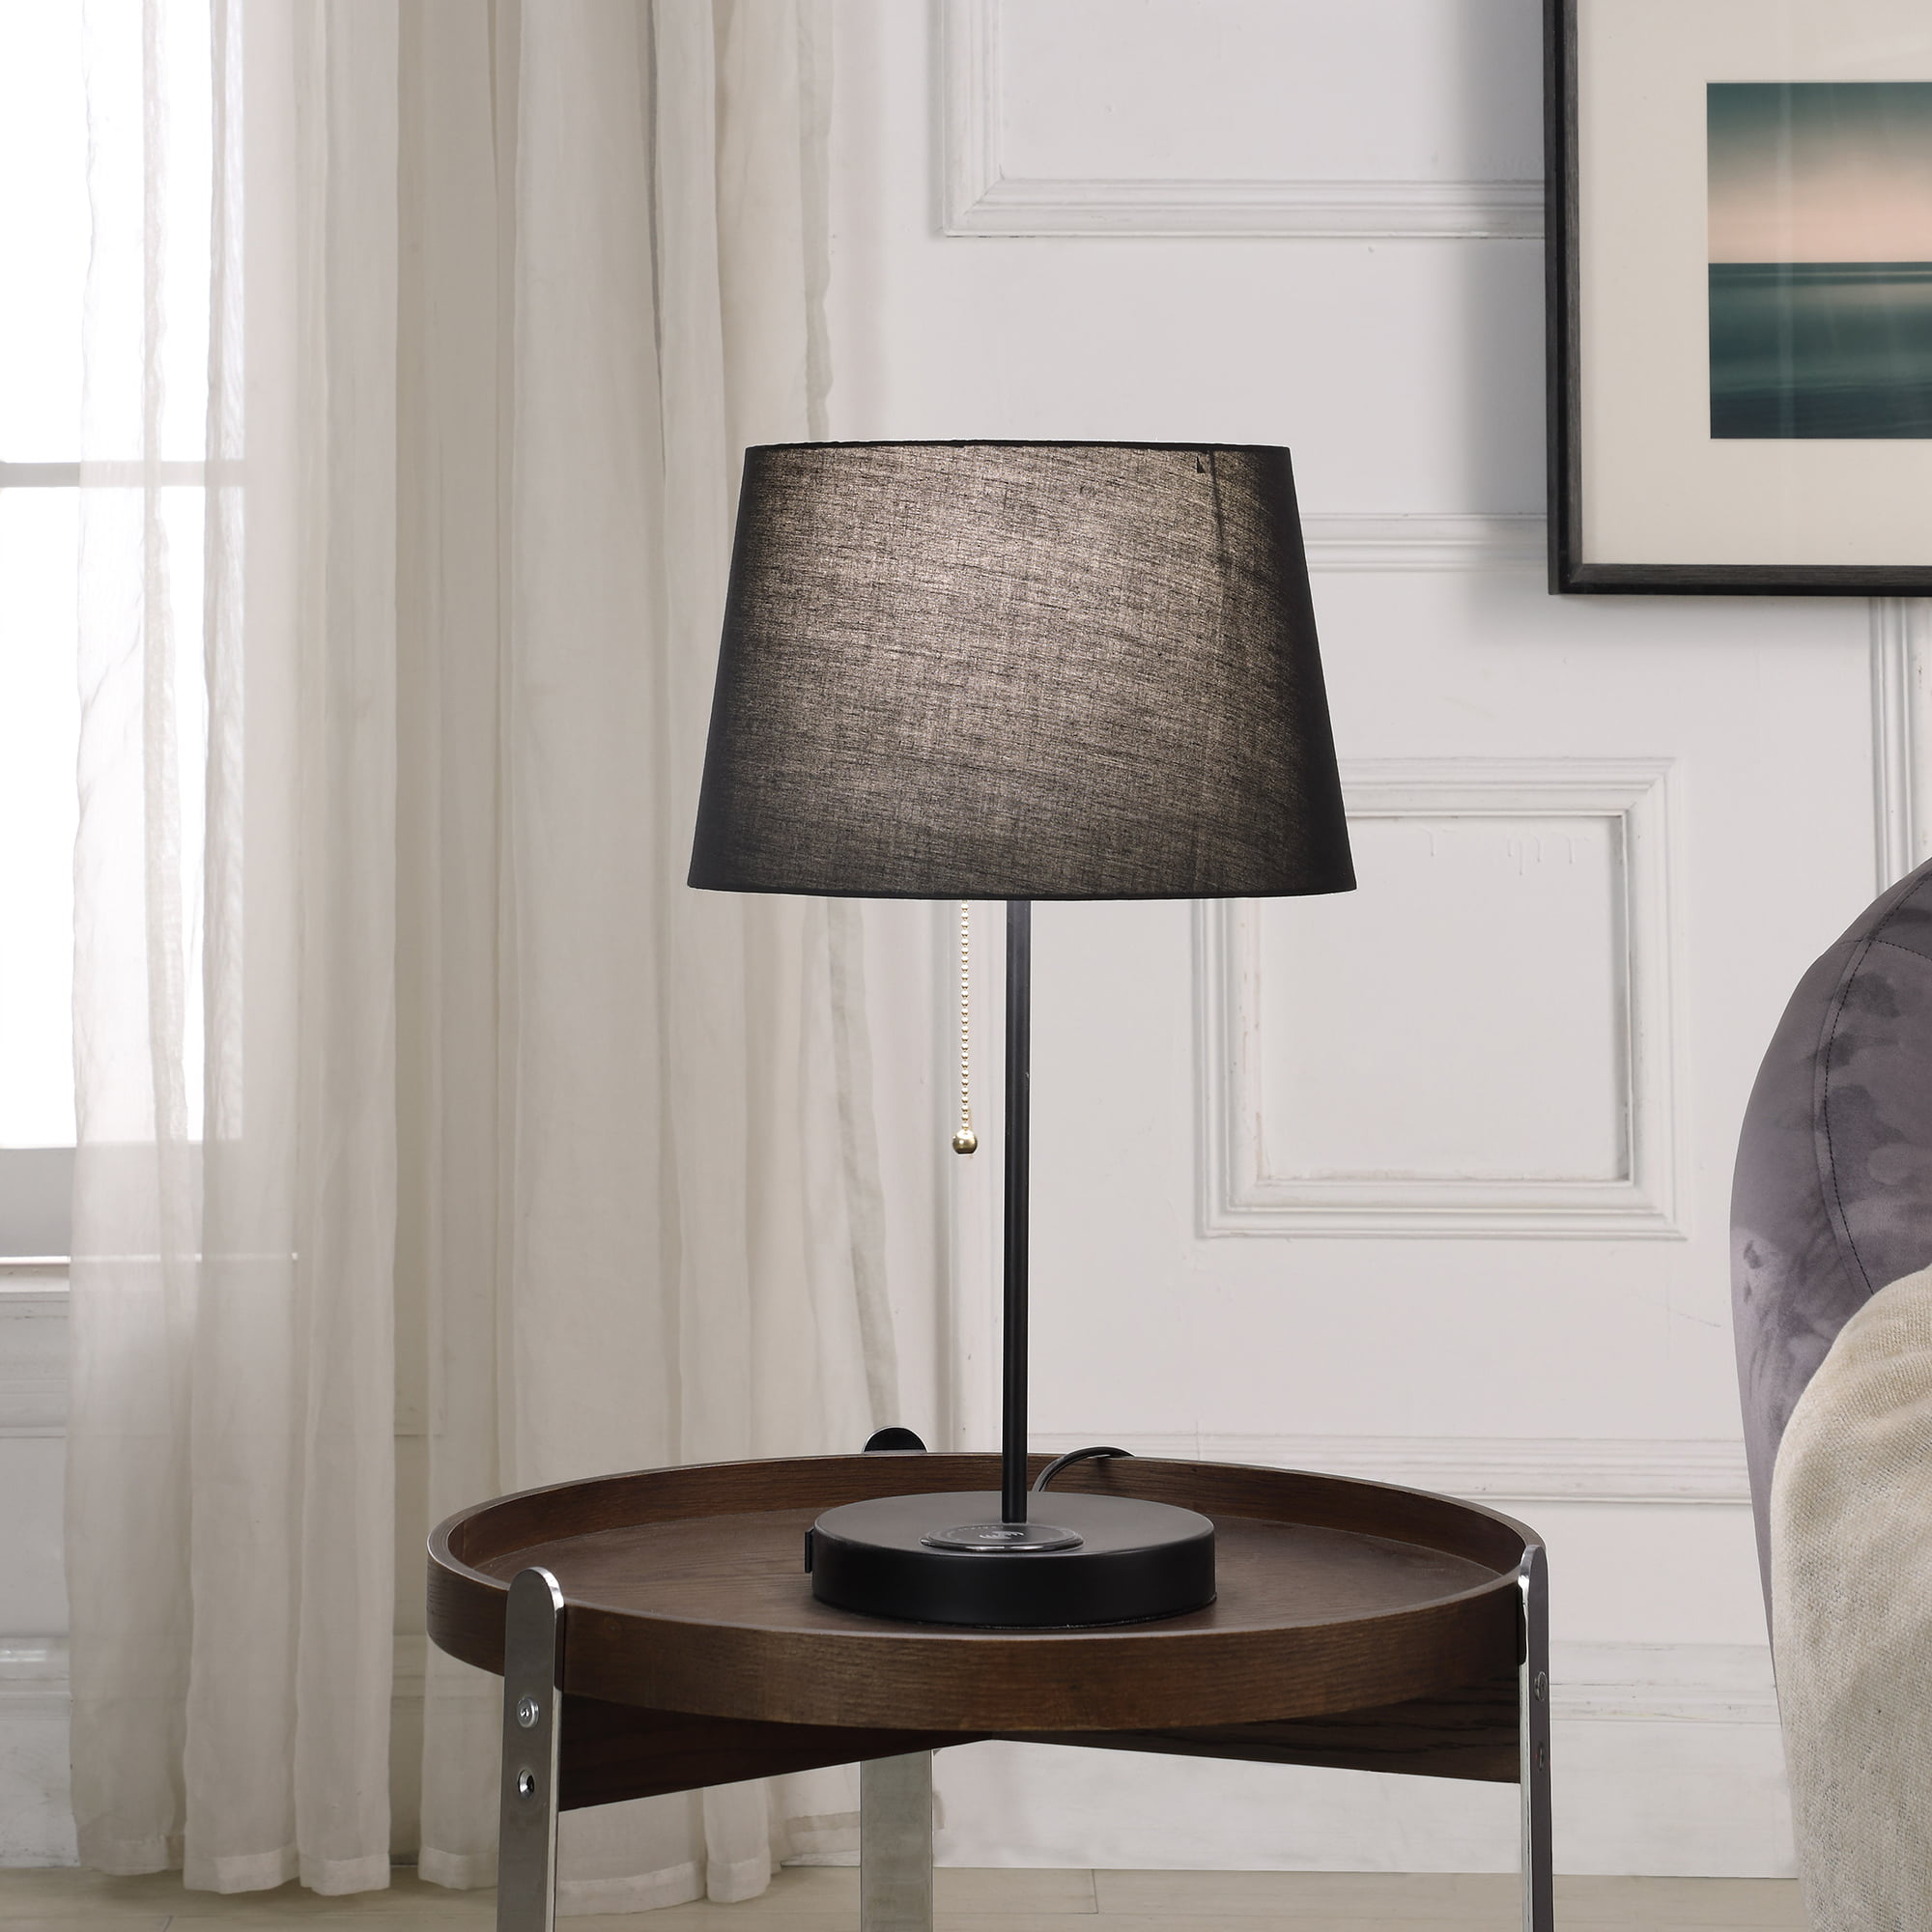 Table Lamp W Wireless Charging Station, Tall Thin Silver Table Lamp Living Room